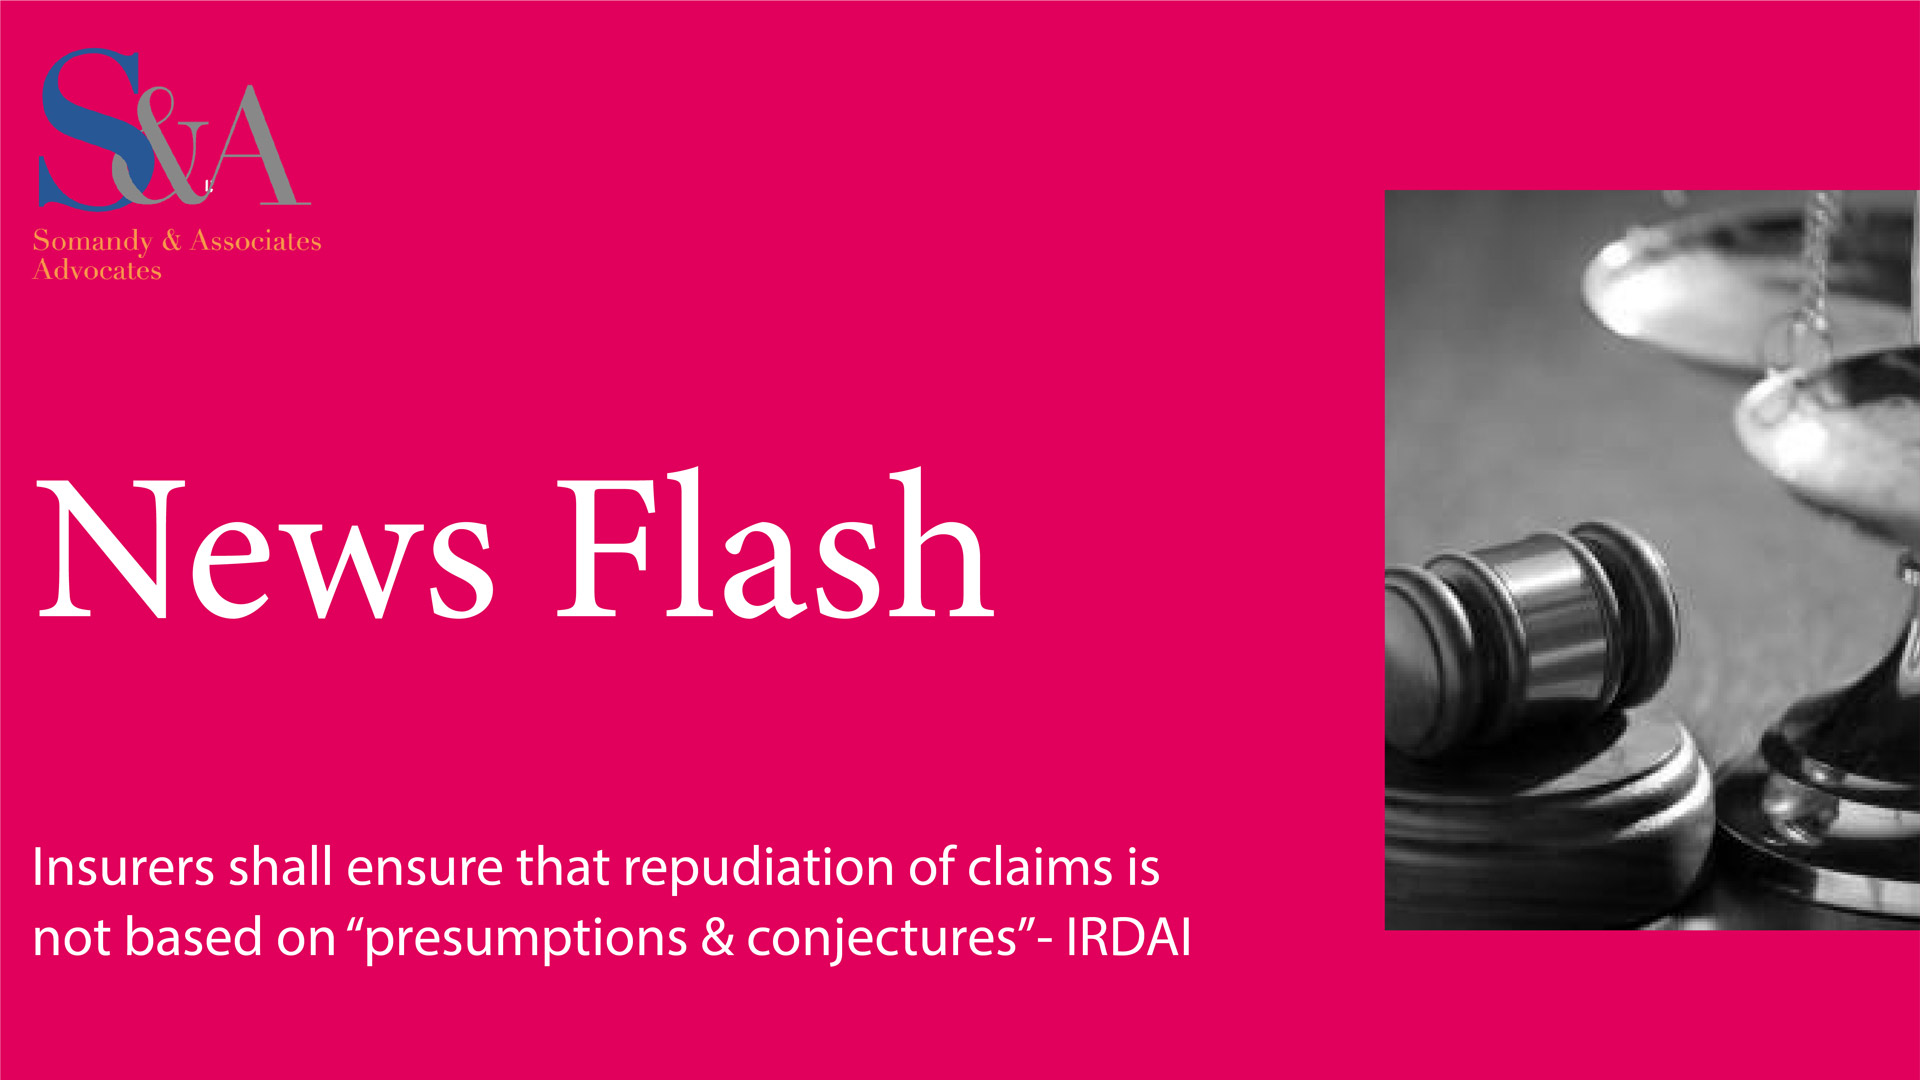 Insurers Shall Ensure That Repudiation of Claims is Not Based on "Presumptions and Conjectures" - IRDAI